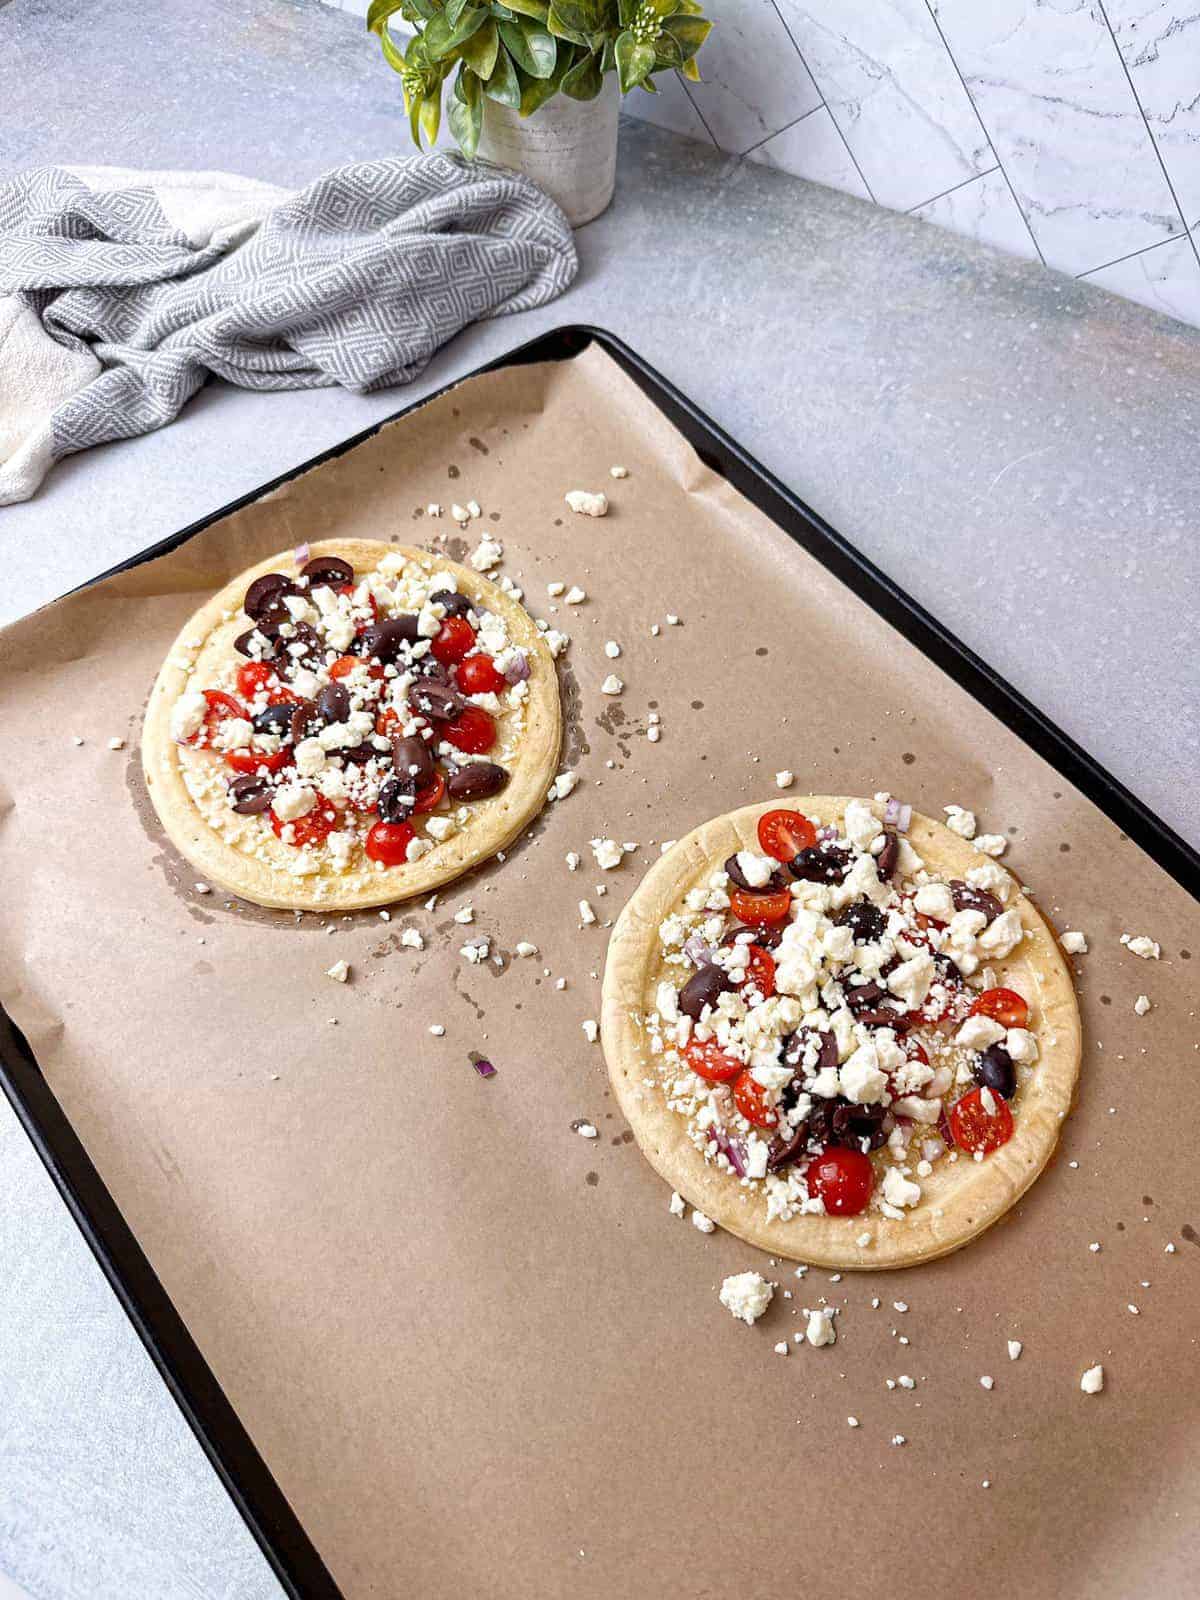 Drizzling tzatziki sauce all over the pizza and garnishing it with sliced Kalamata olives after it was baked in the oven